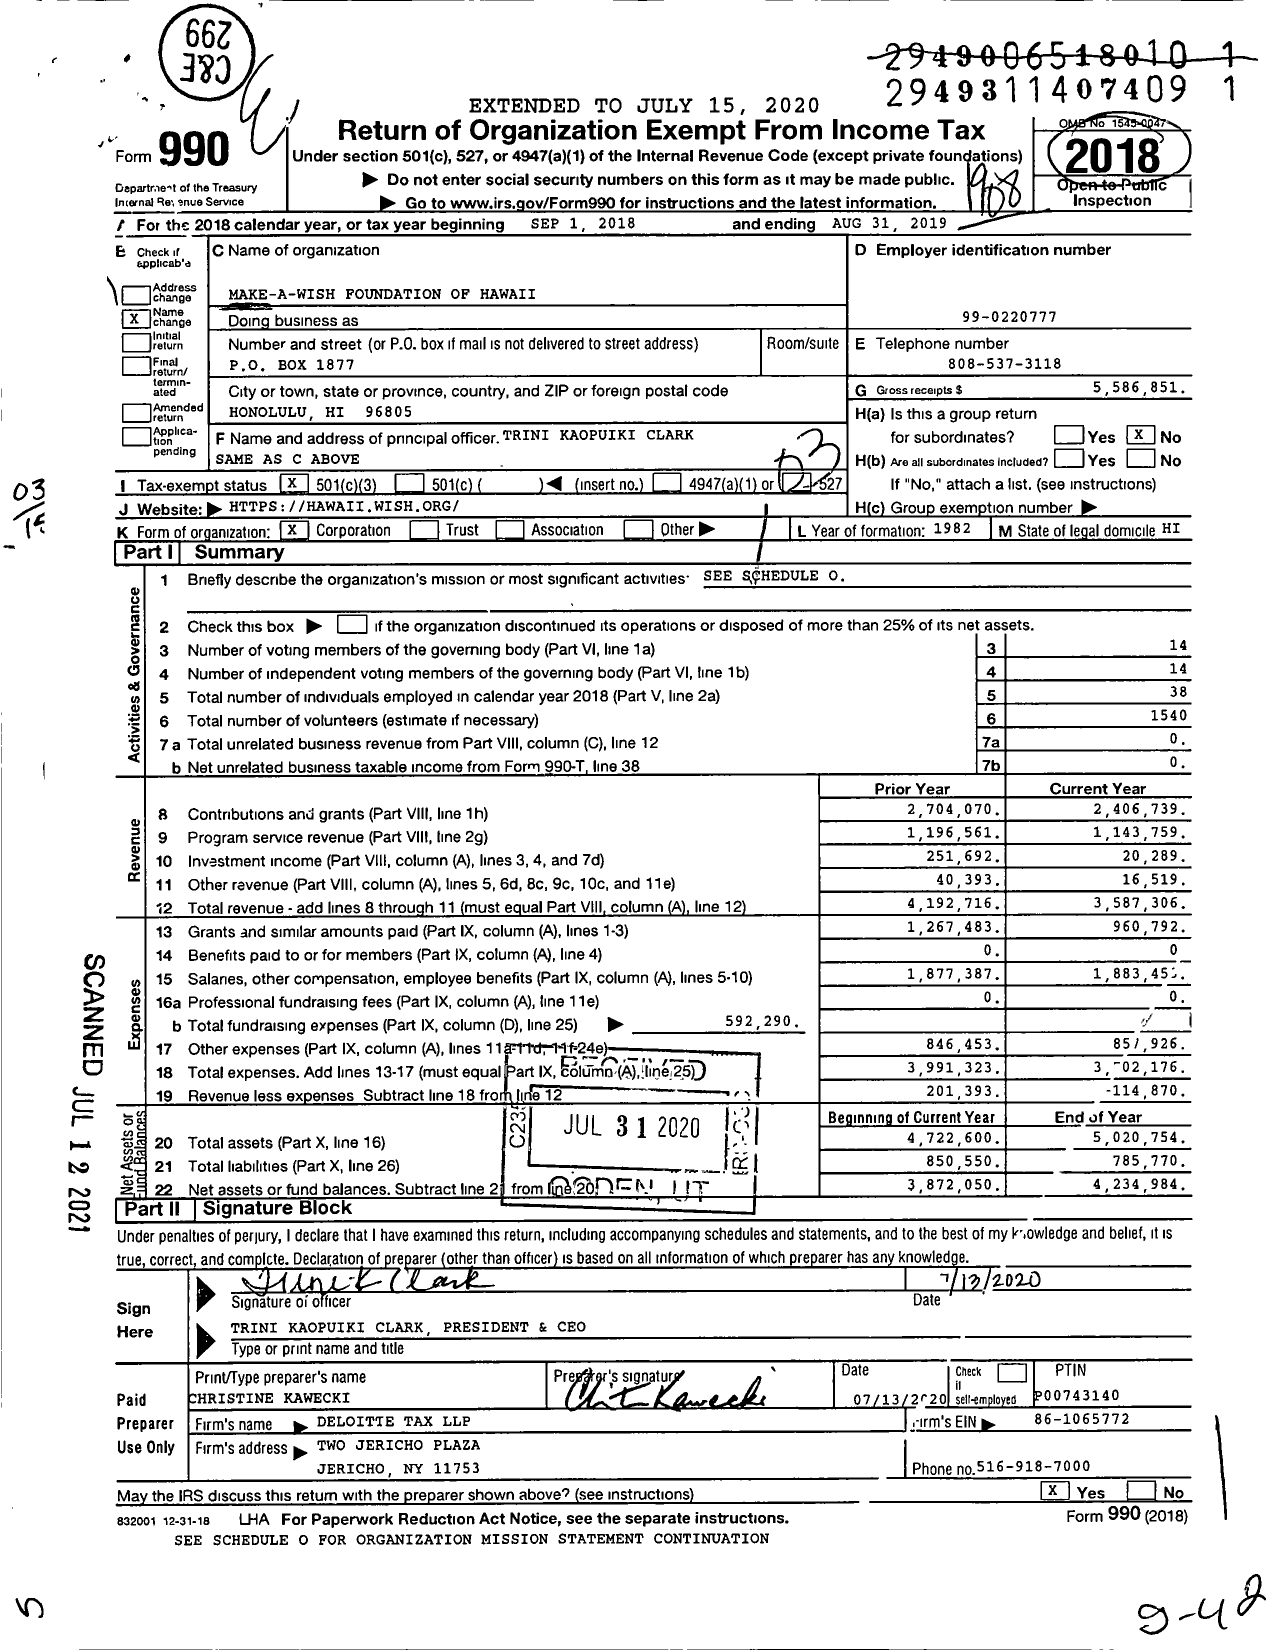 Image of first page of 2018 Form 990 for Make-A-Wish Foundation of Hawaii